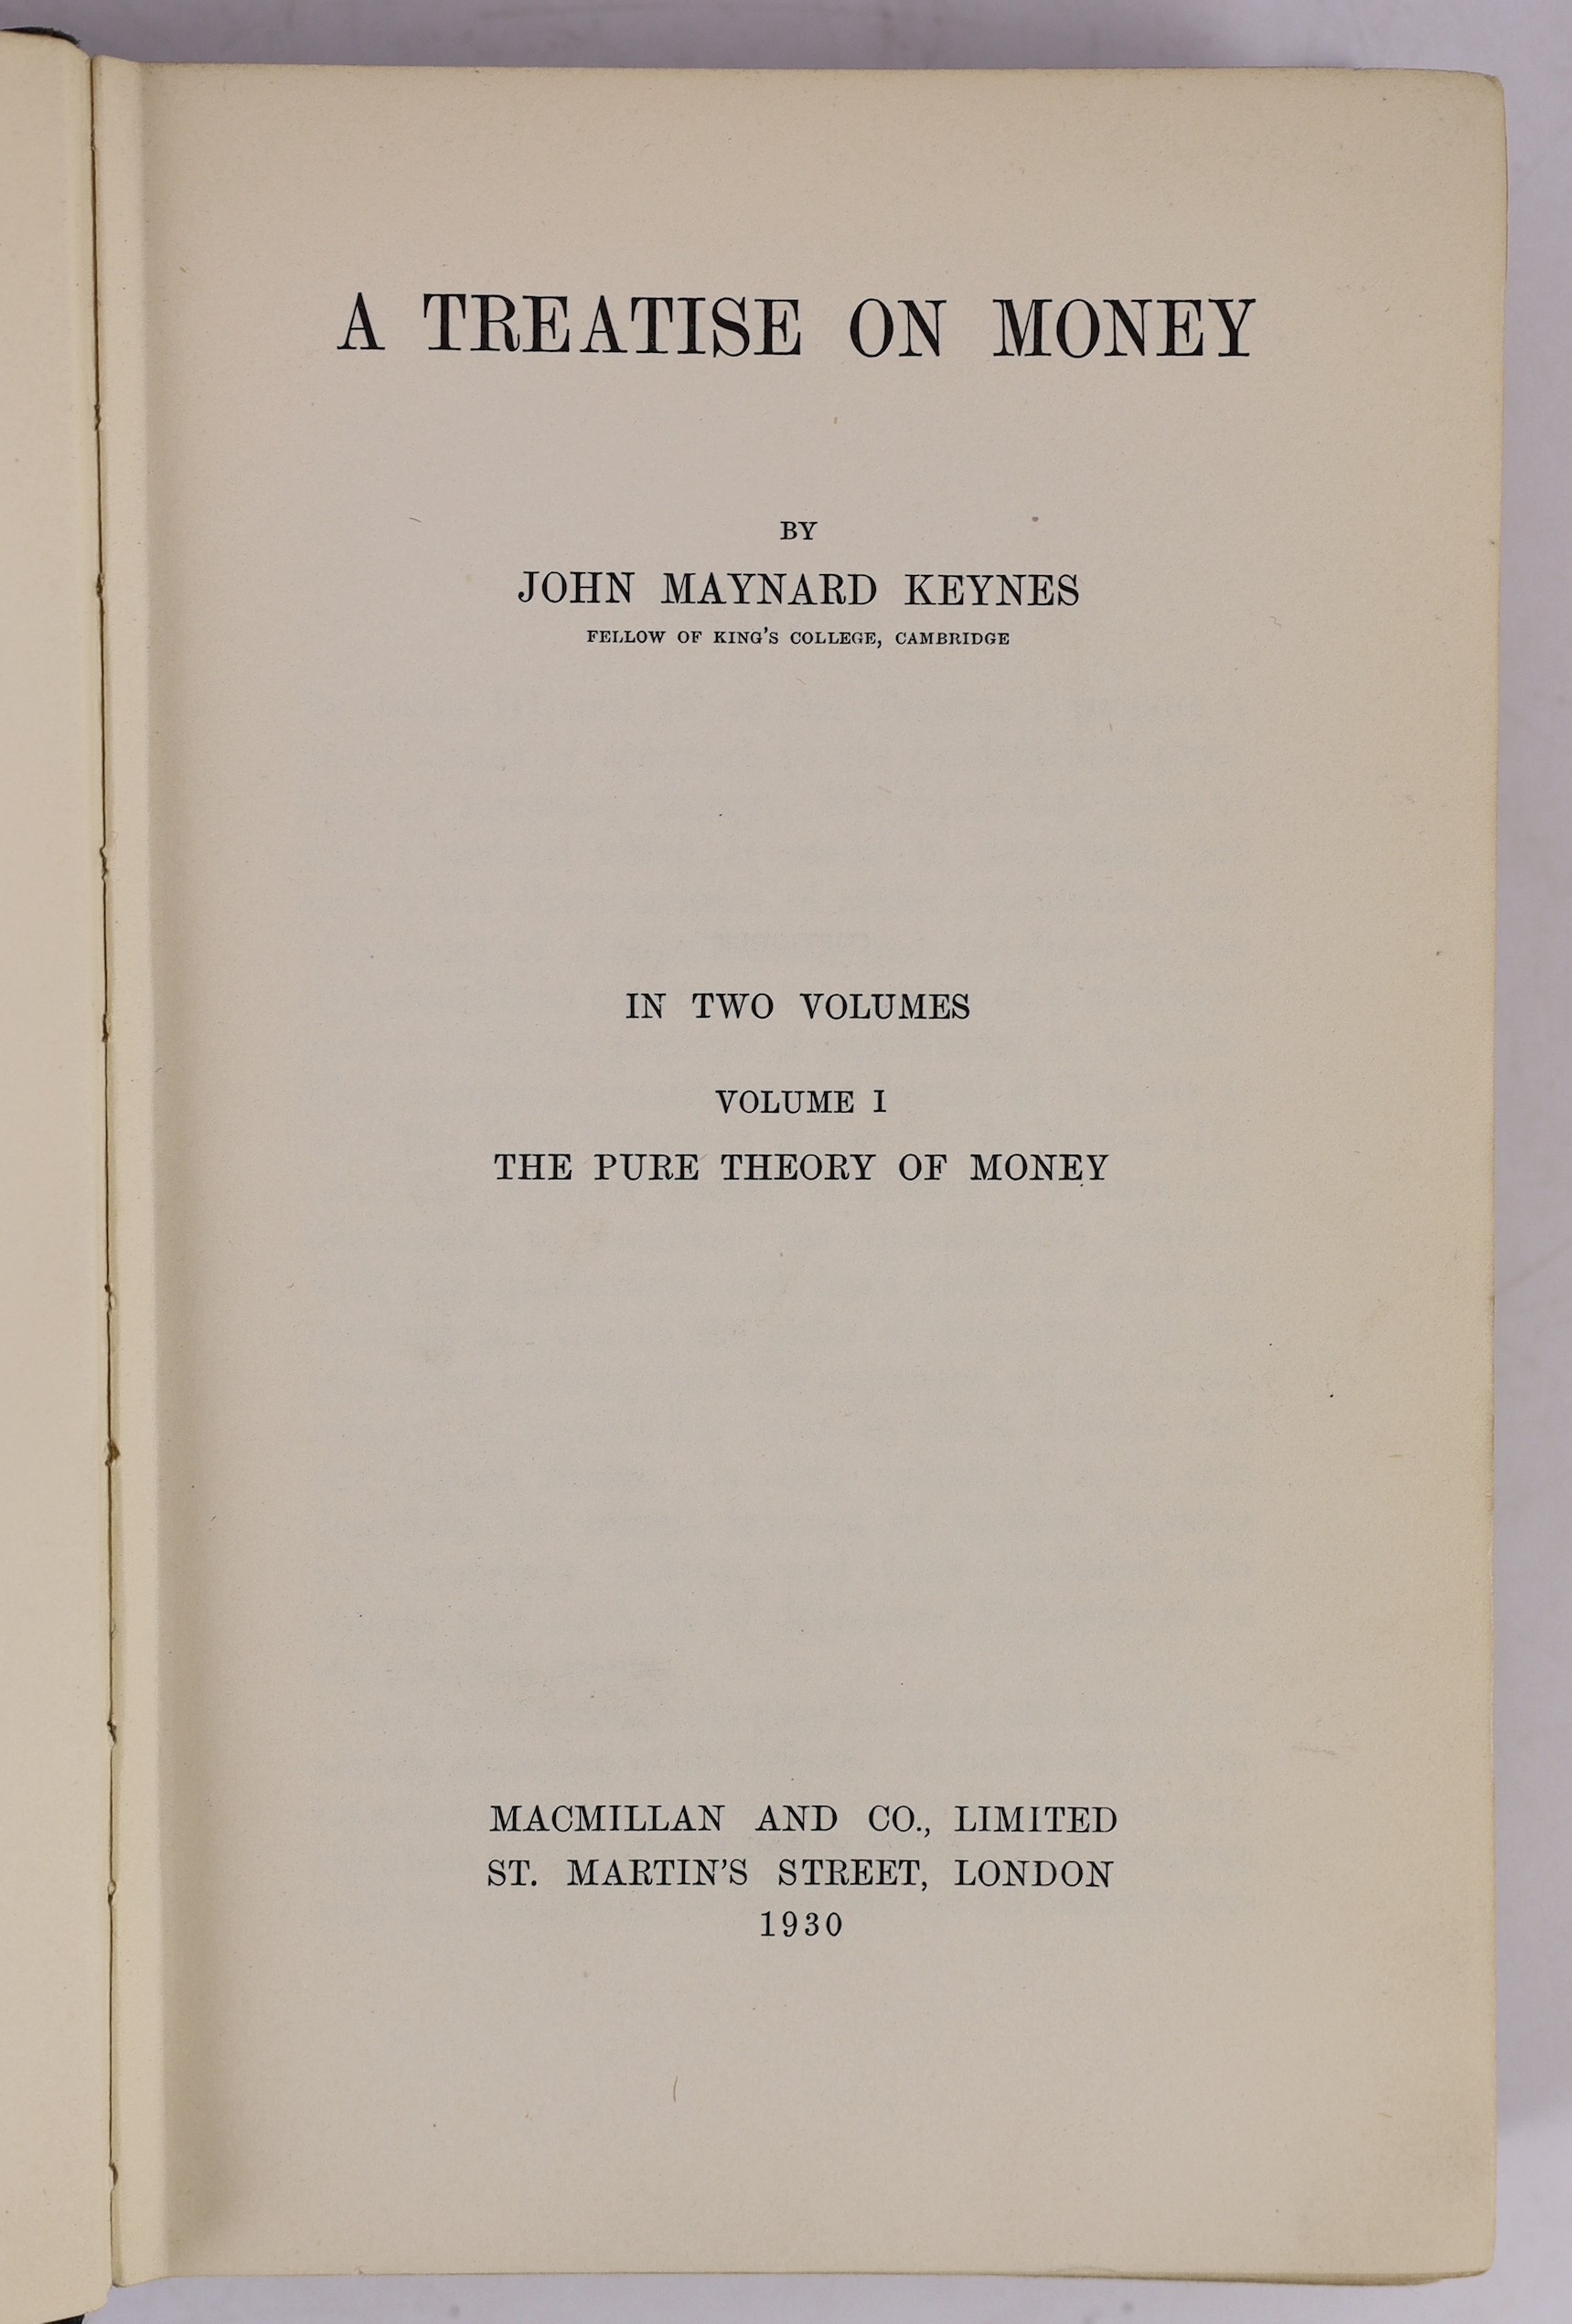 Keynes, John Maynard - The General Theory of Employment Interest and Money. First Edition.